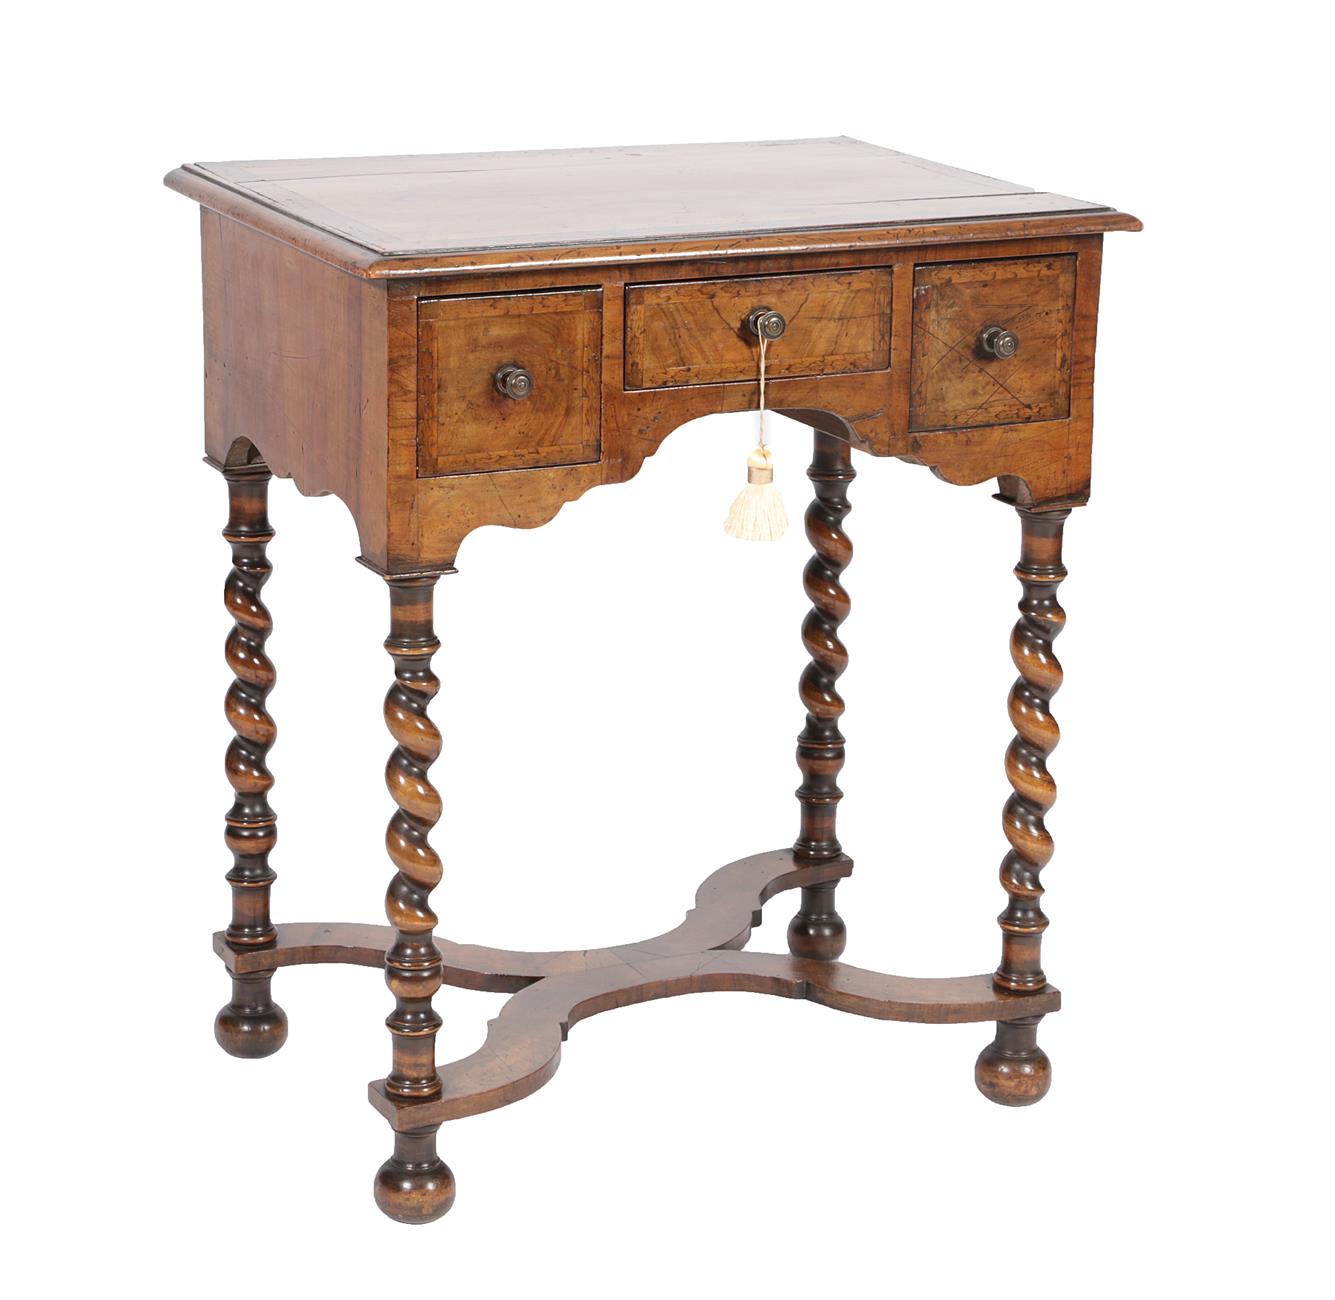 Lot 530 - A William & Mary Style Figured Walnut and Crossbanded Side Table, with three small drawers above an